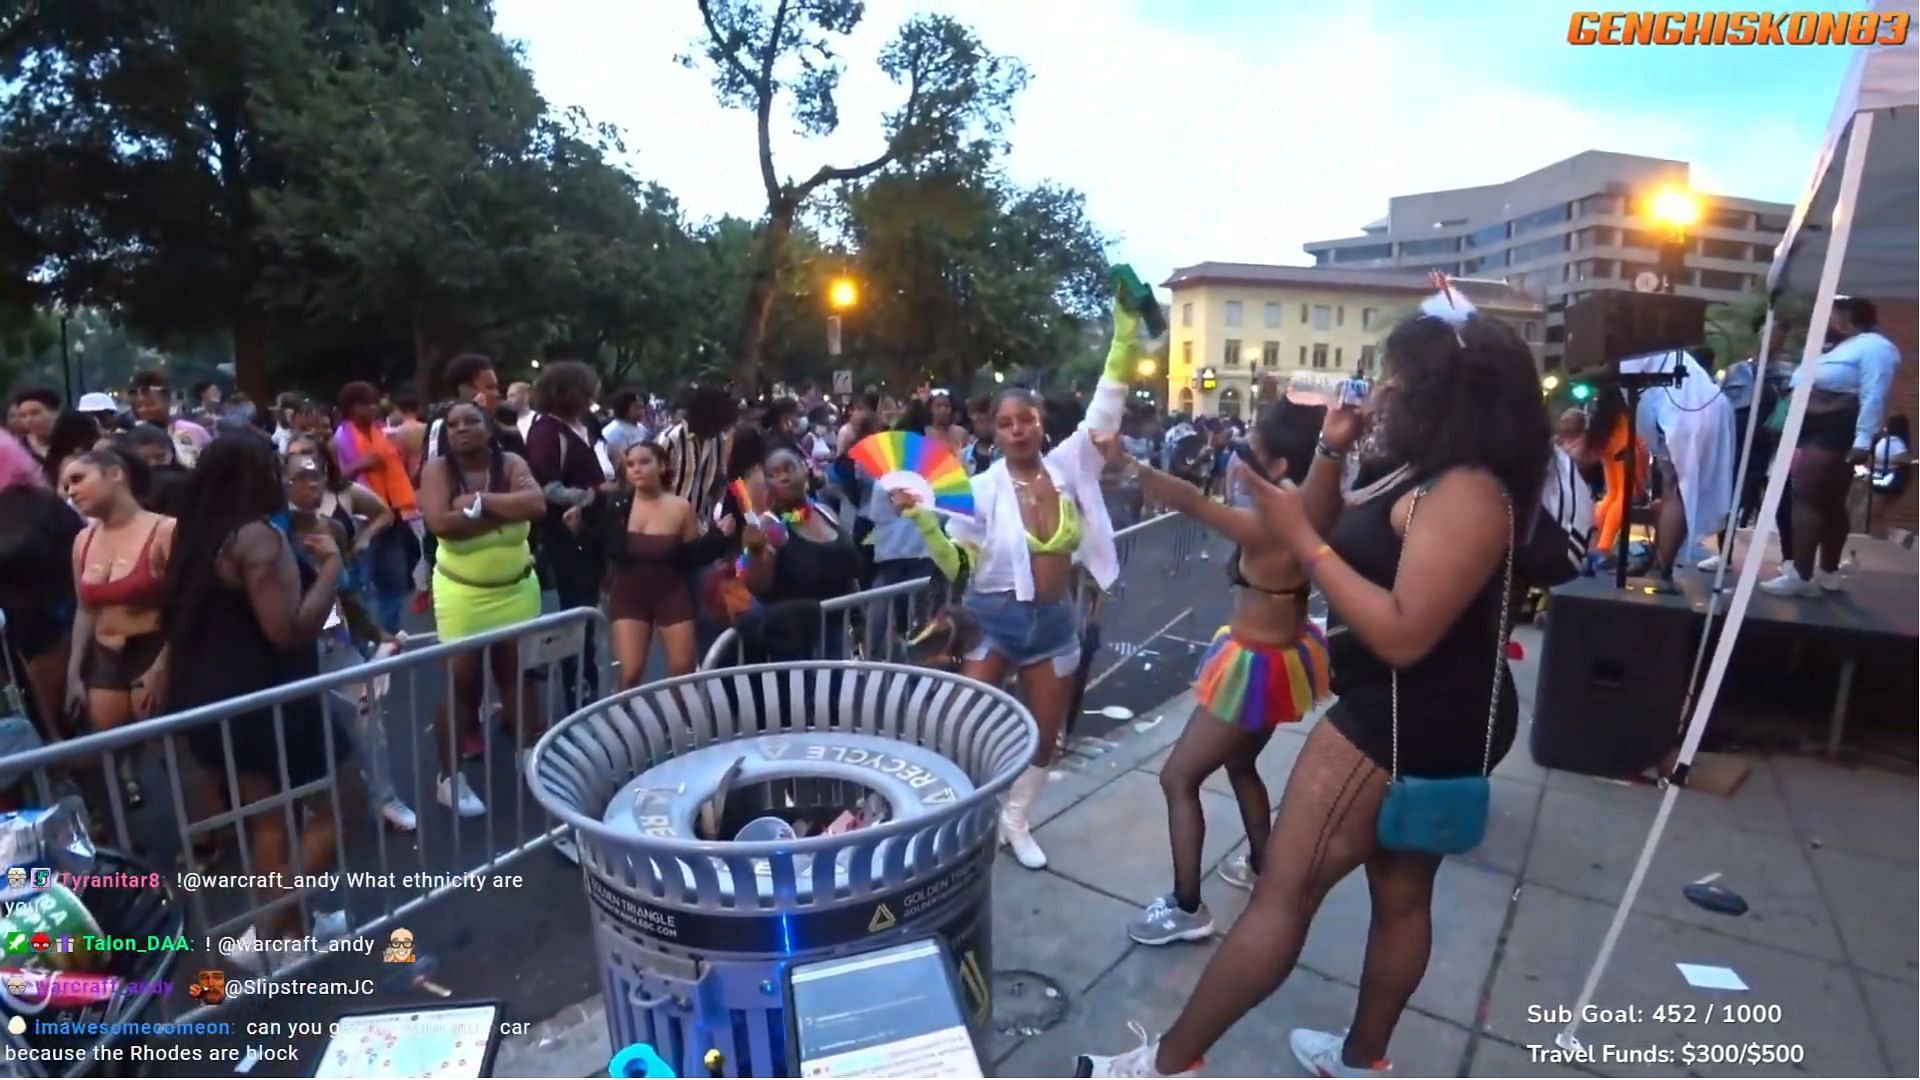 An IRL stream captured a fight breaking out at a Pride Month parade (Image via Genghiskon83/Twitch)